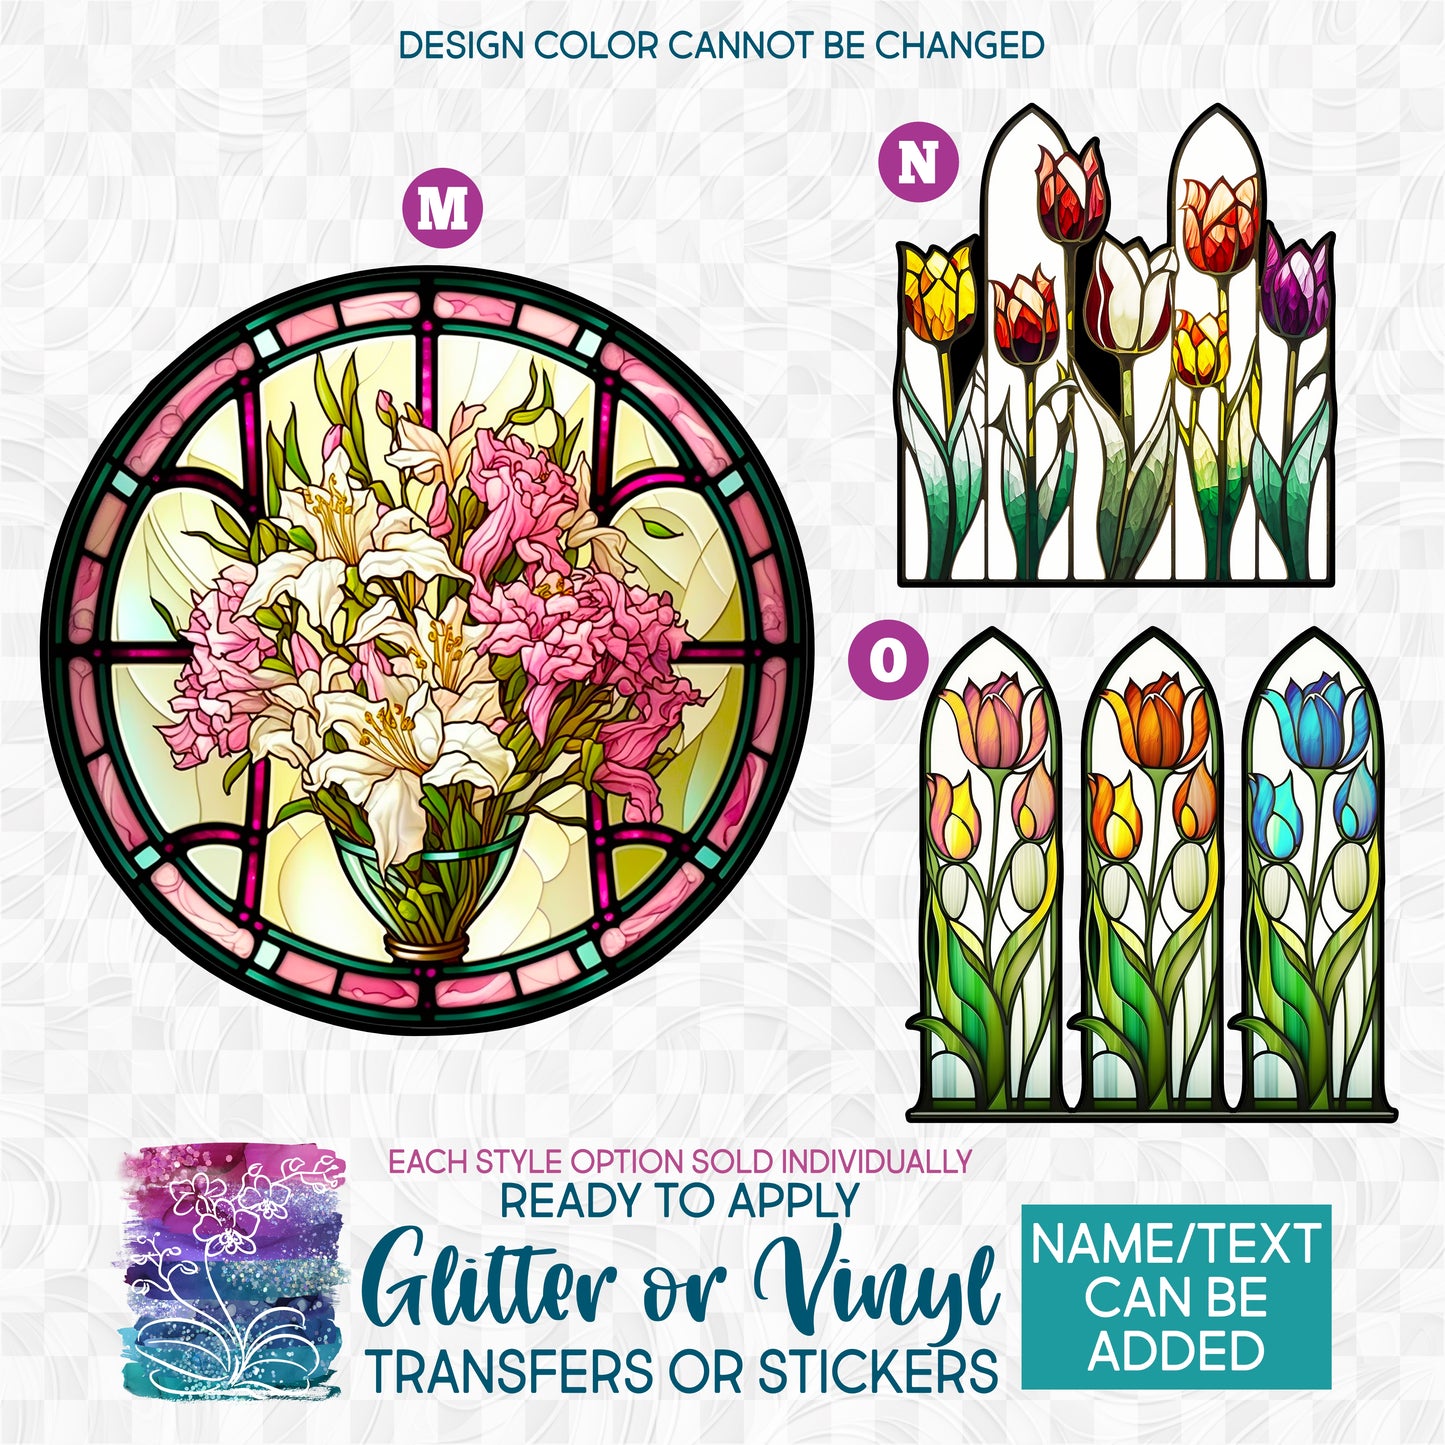 (s150-06) Stained-Glass Flower Lily 2 Glitter or Vinyl Iron-On Transfer or Sticker